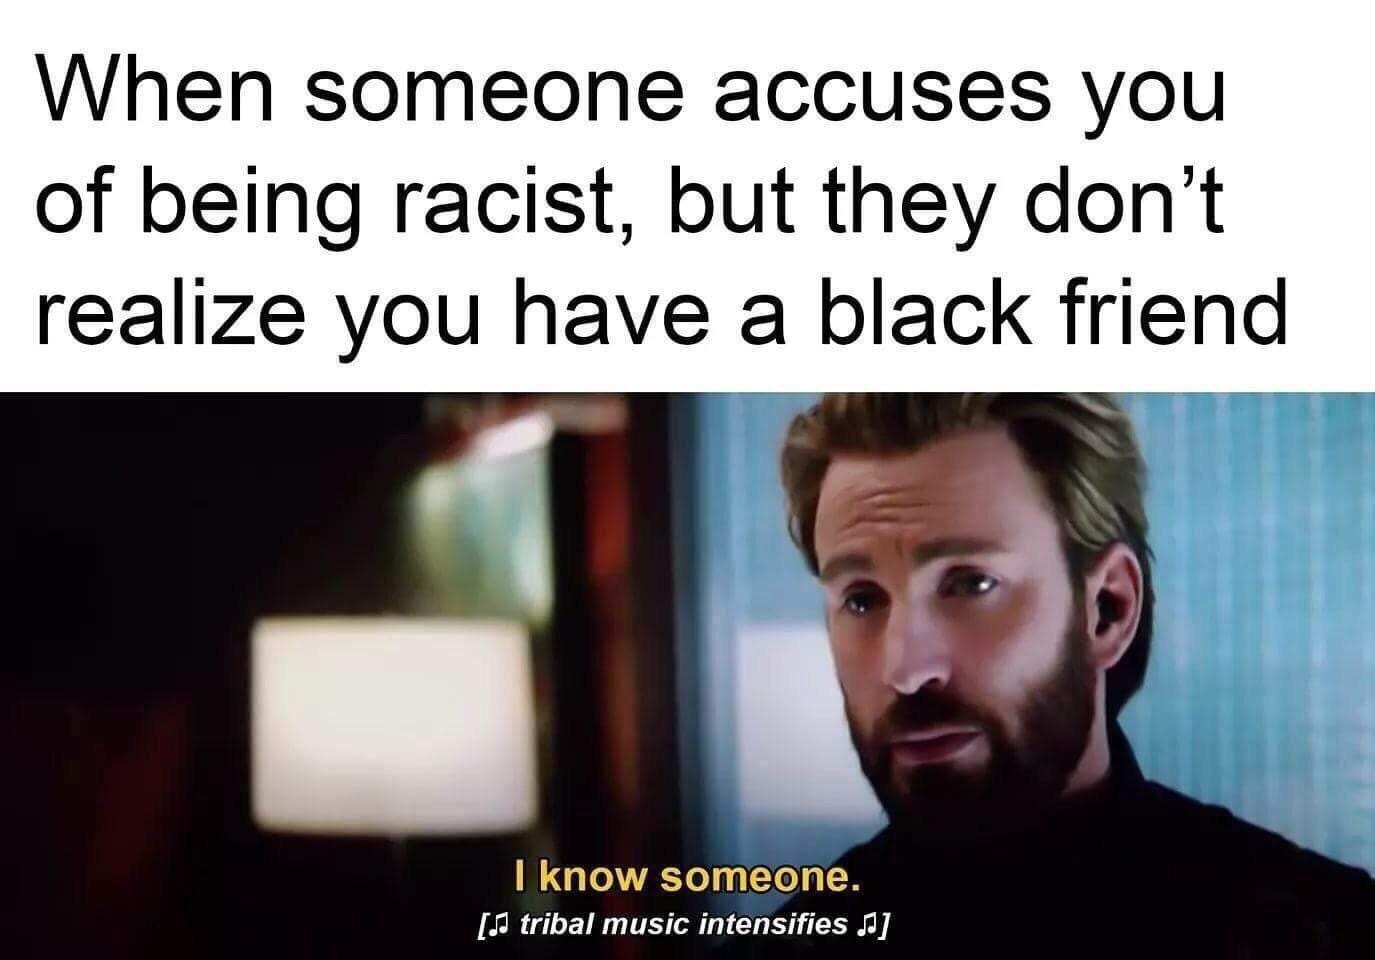 I'm not racist, I have black friends. : r/memes